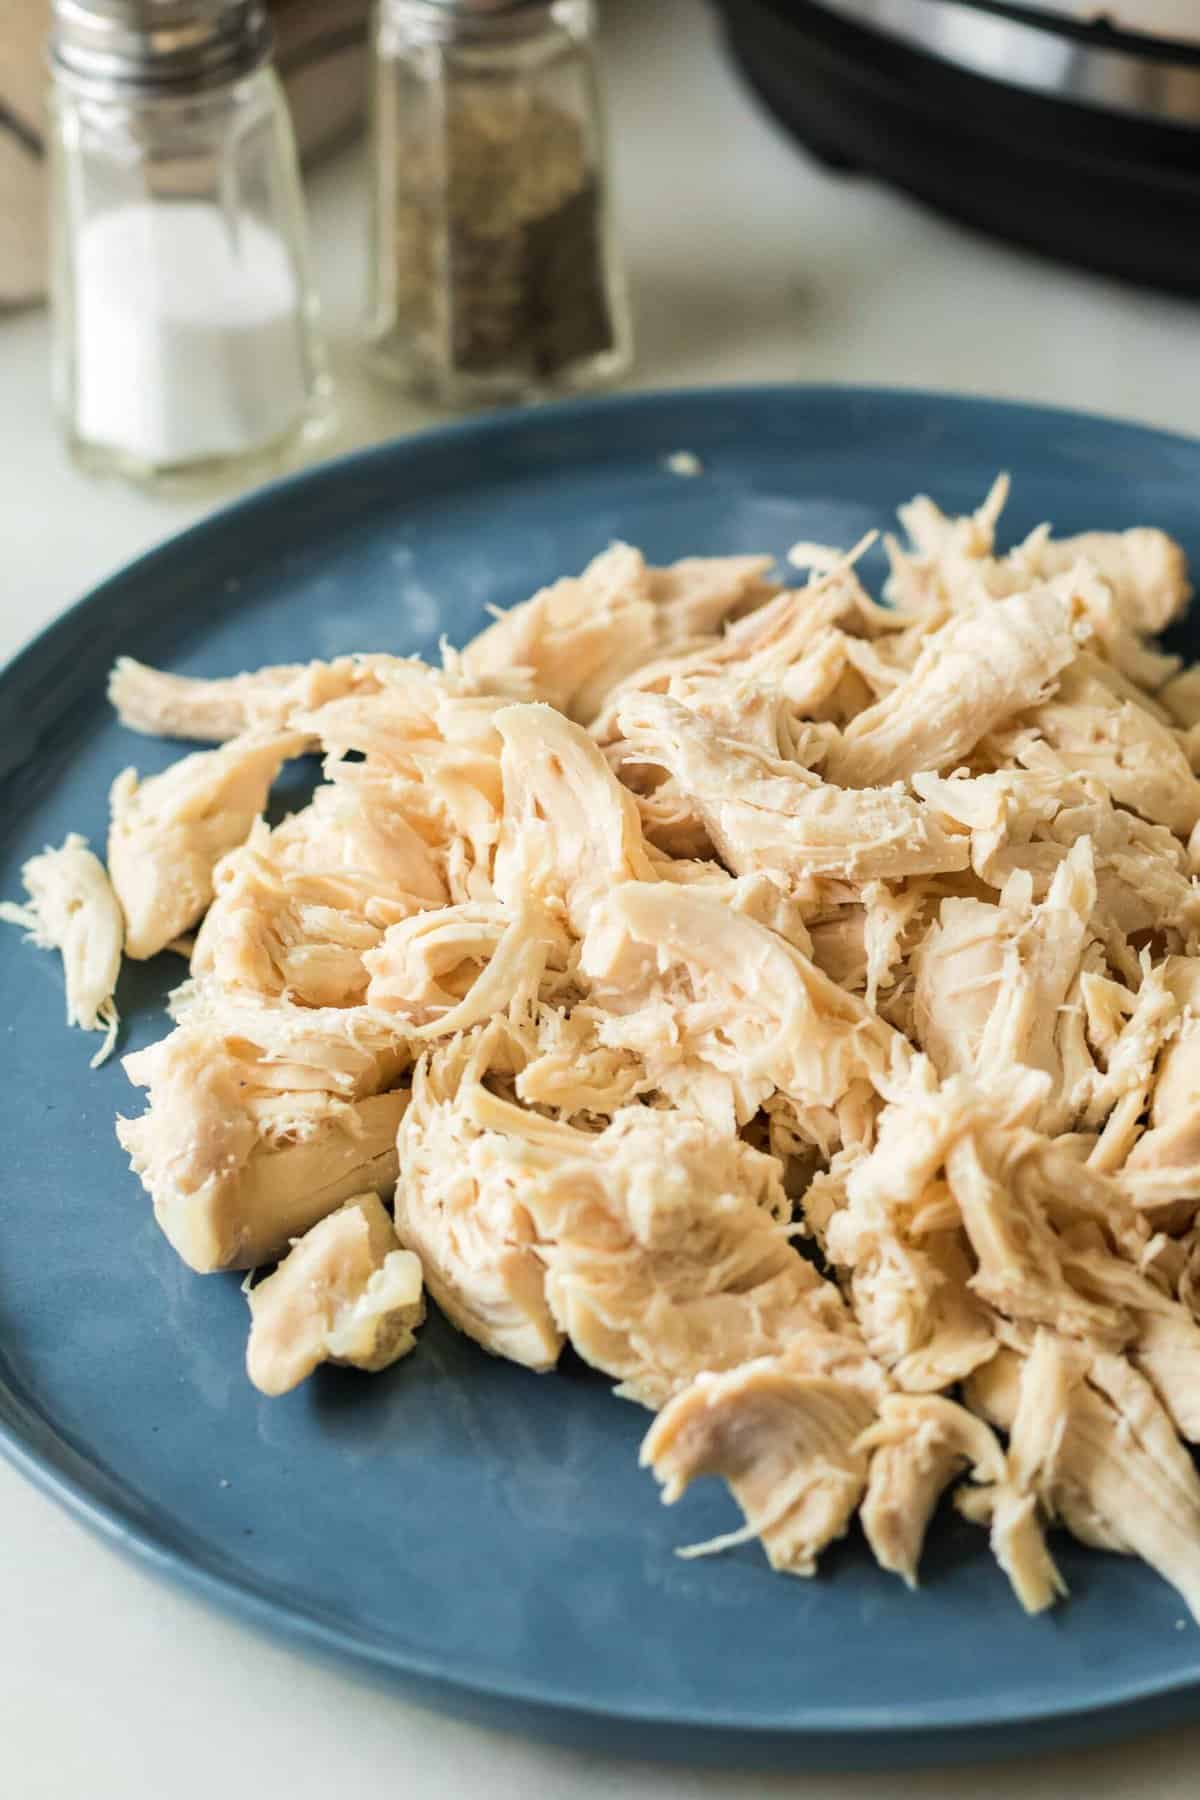 How To Boil Chicken for Dogs